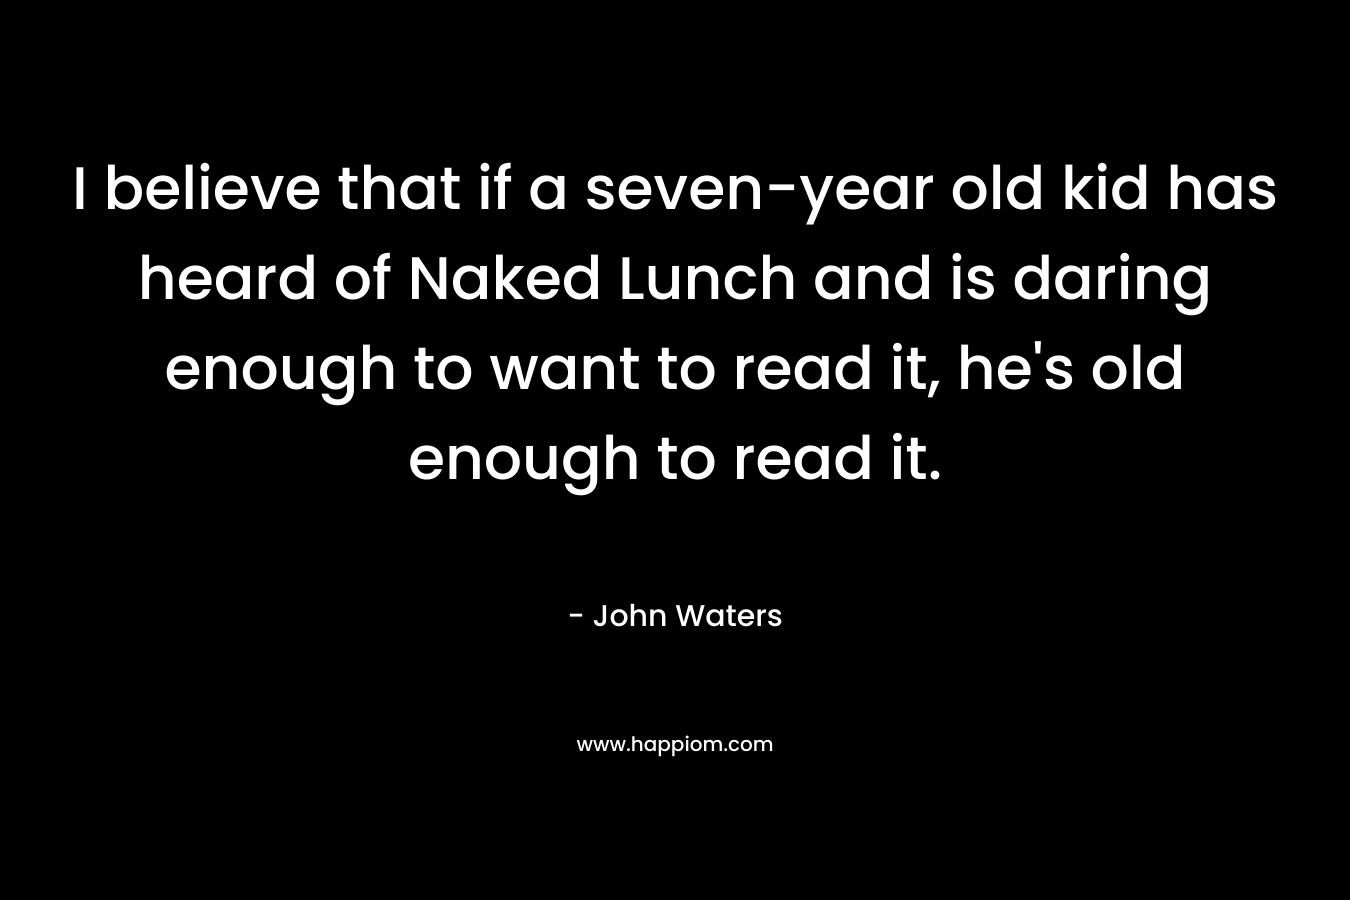 I believe that if a seven-year old kid has heard of Naked Lunch and is daring enough to want to read it, he’s old enough to read it. – John Waters